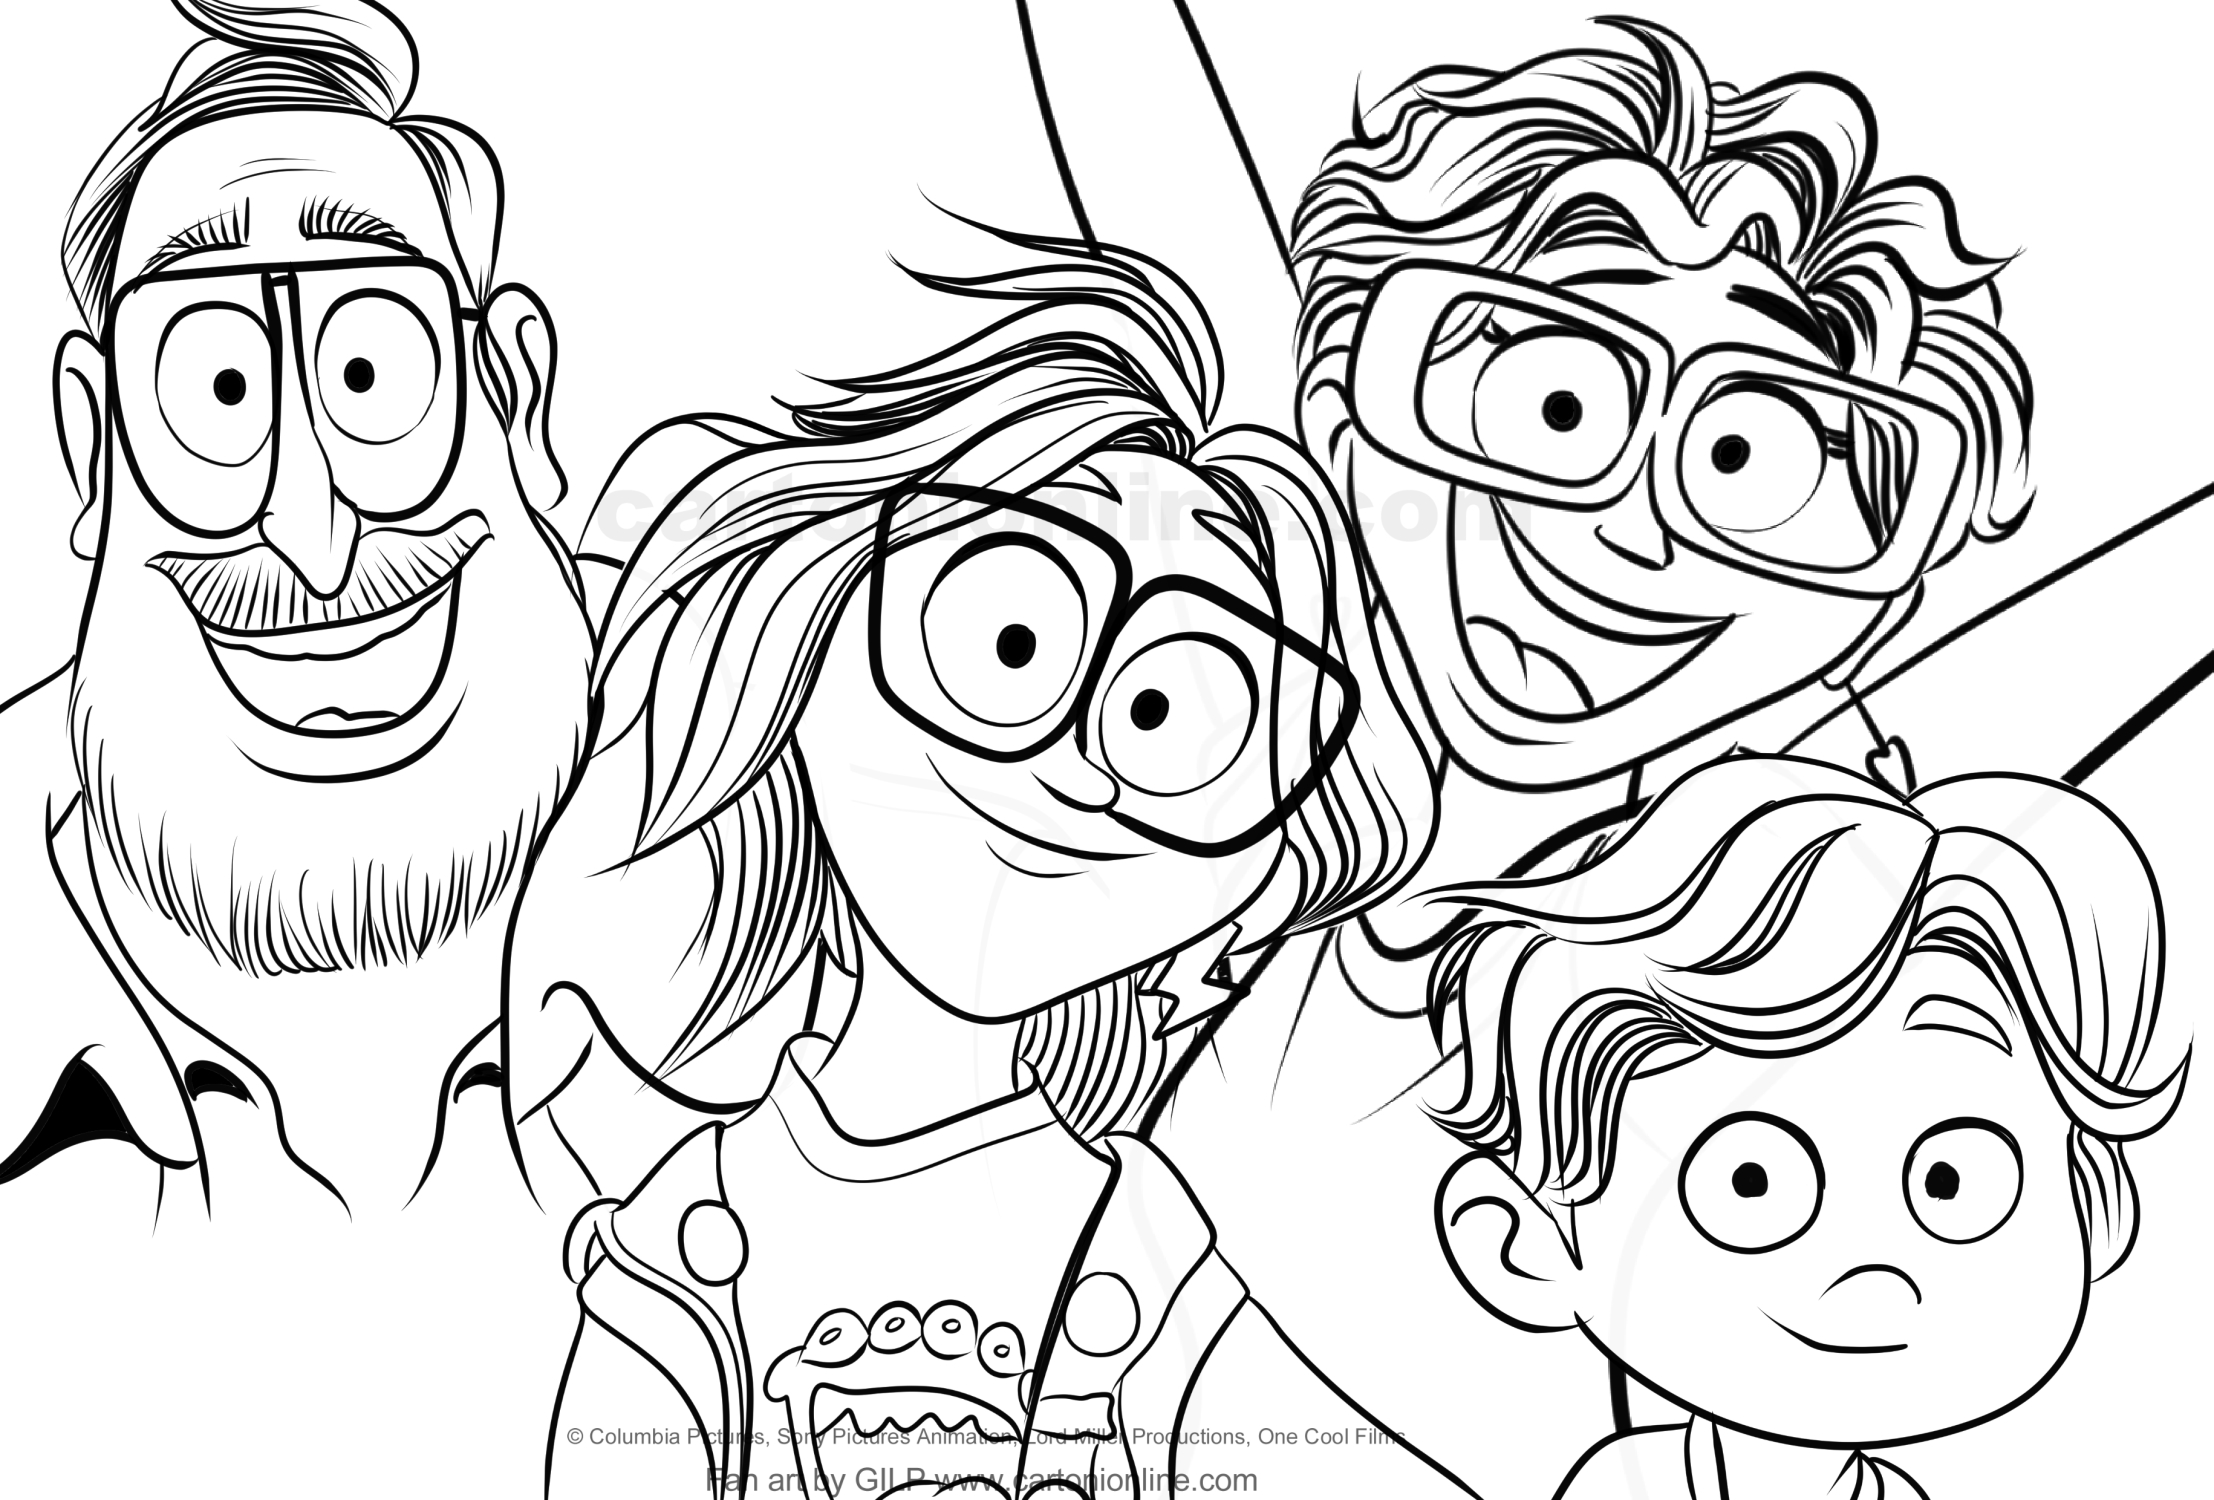 Katie, Rick, Linda Mitchell Mitchellowie kontra maszyny coloring page to print and coloring